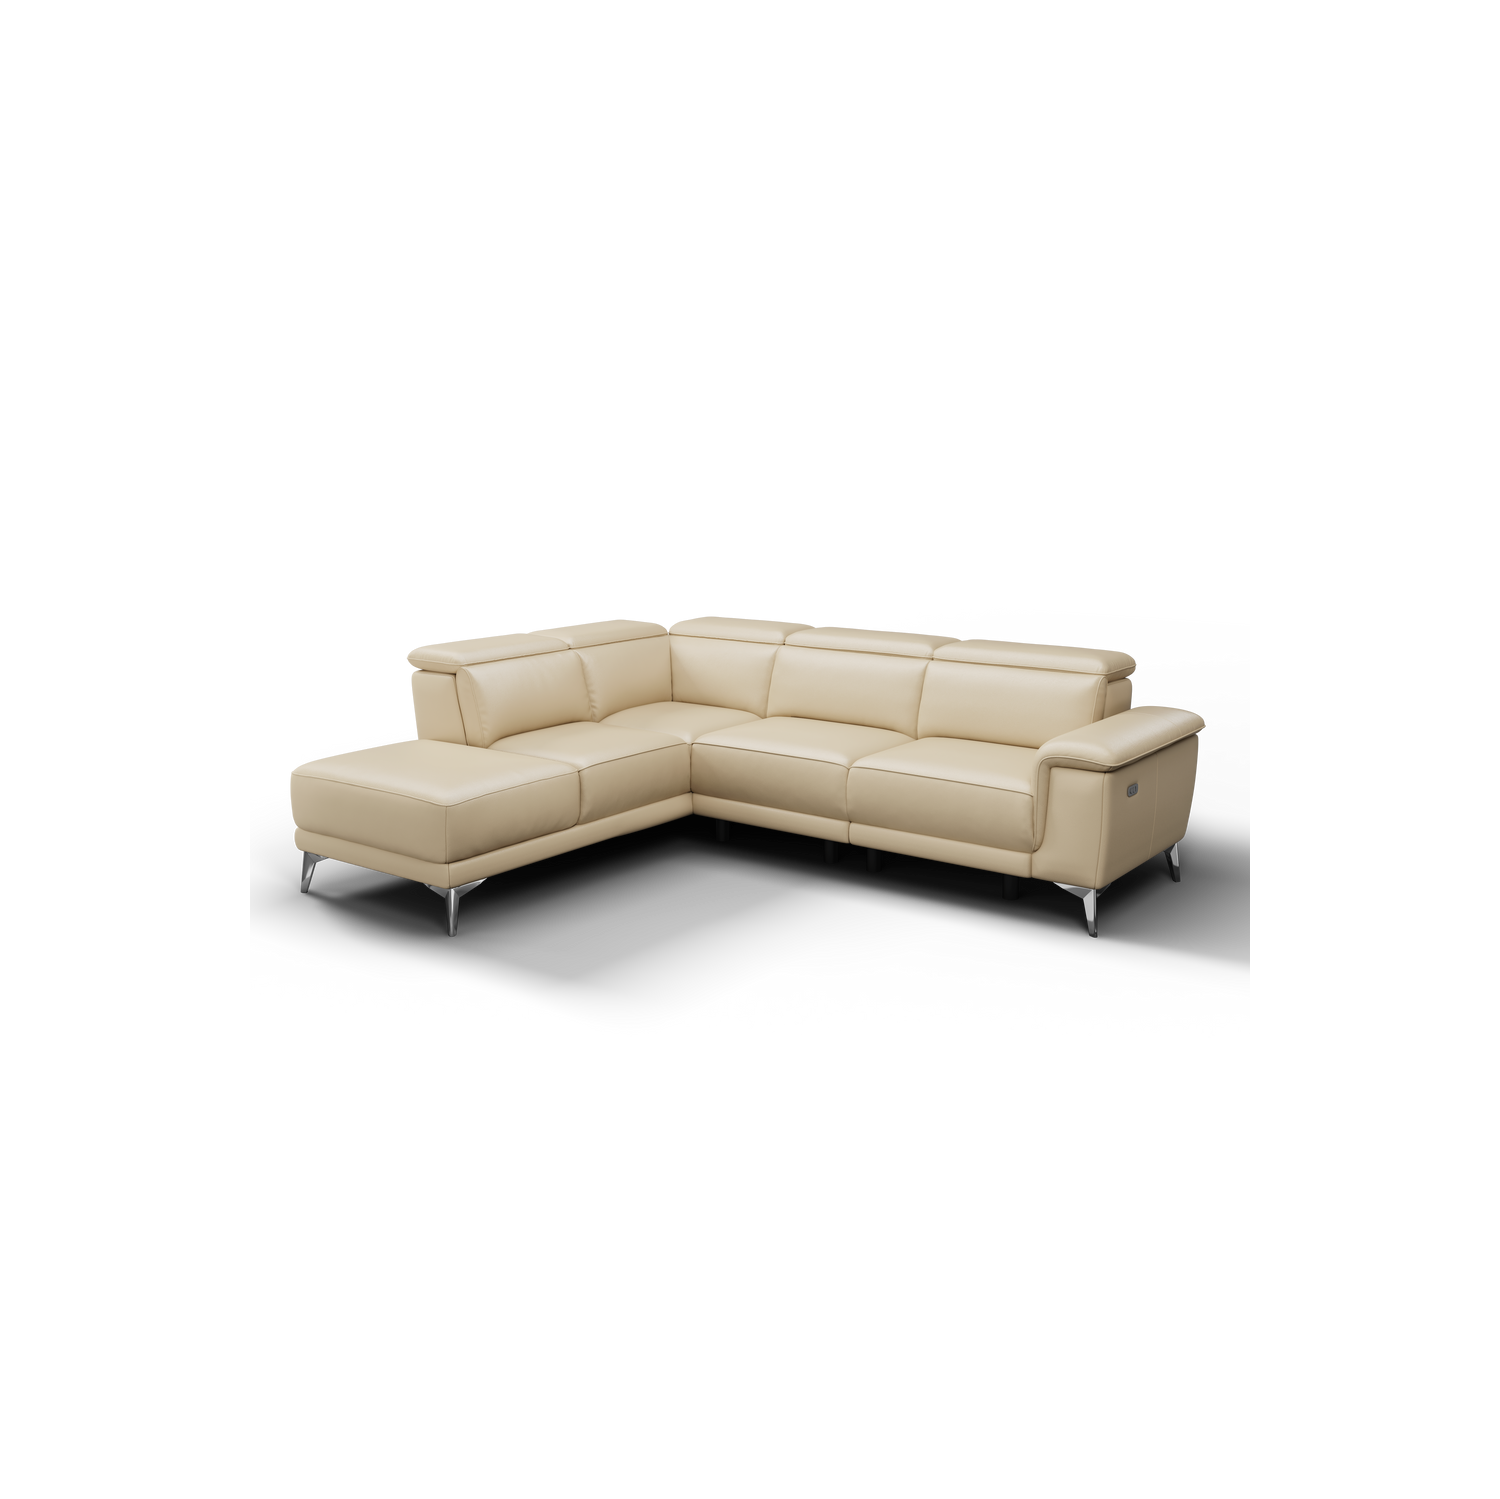 Pista Contemporary Beige Top Grain Leather Power Reclining Sectional with Left Hand Facing Chaise